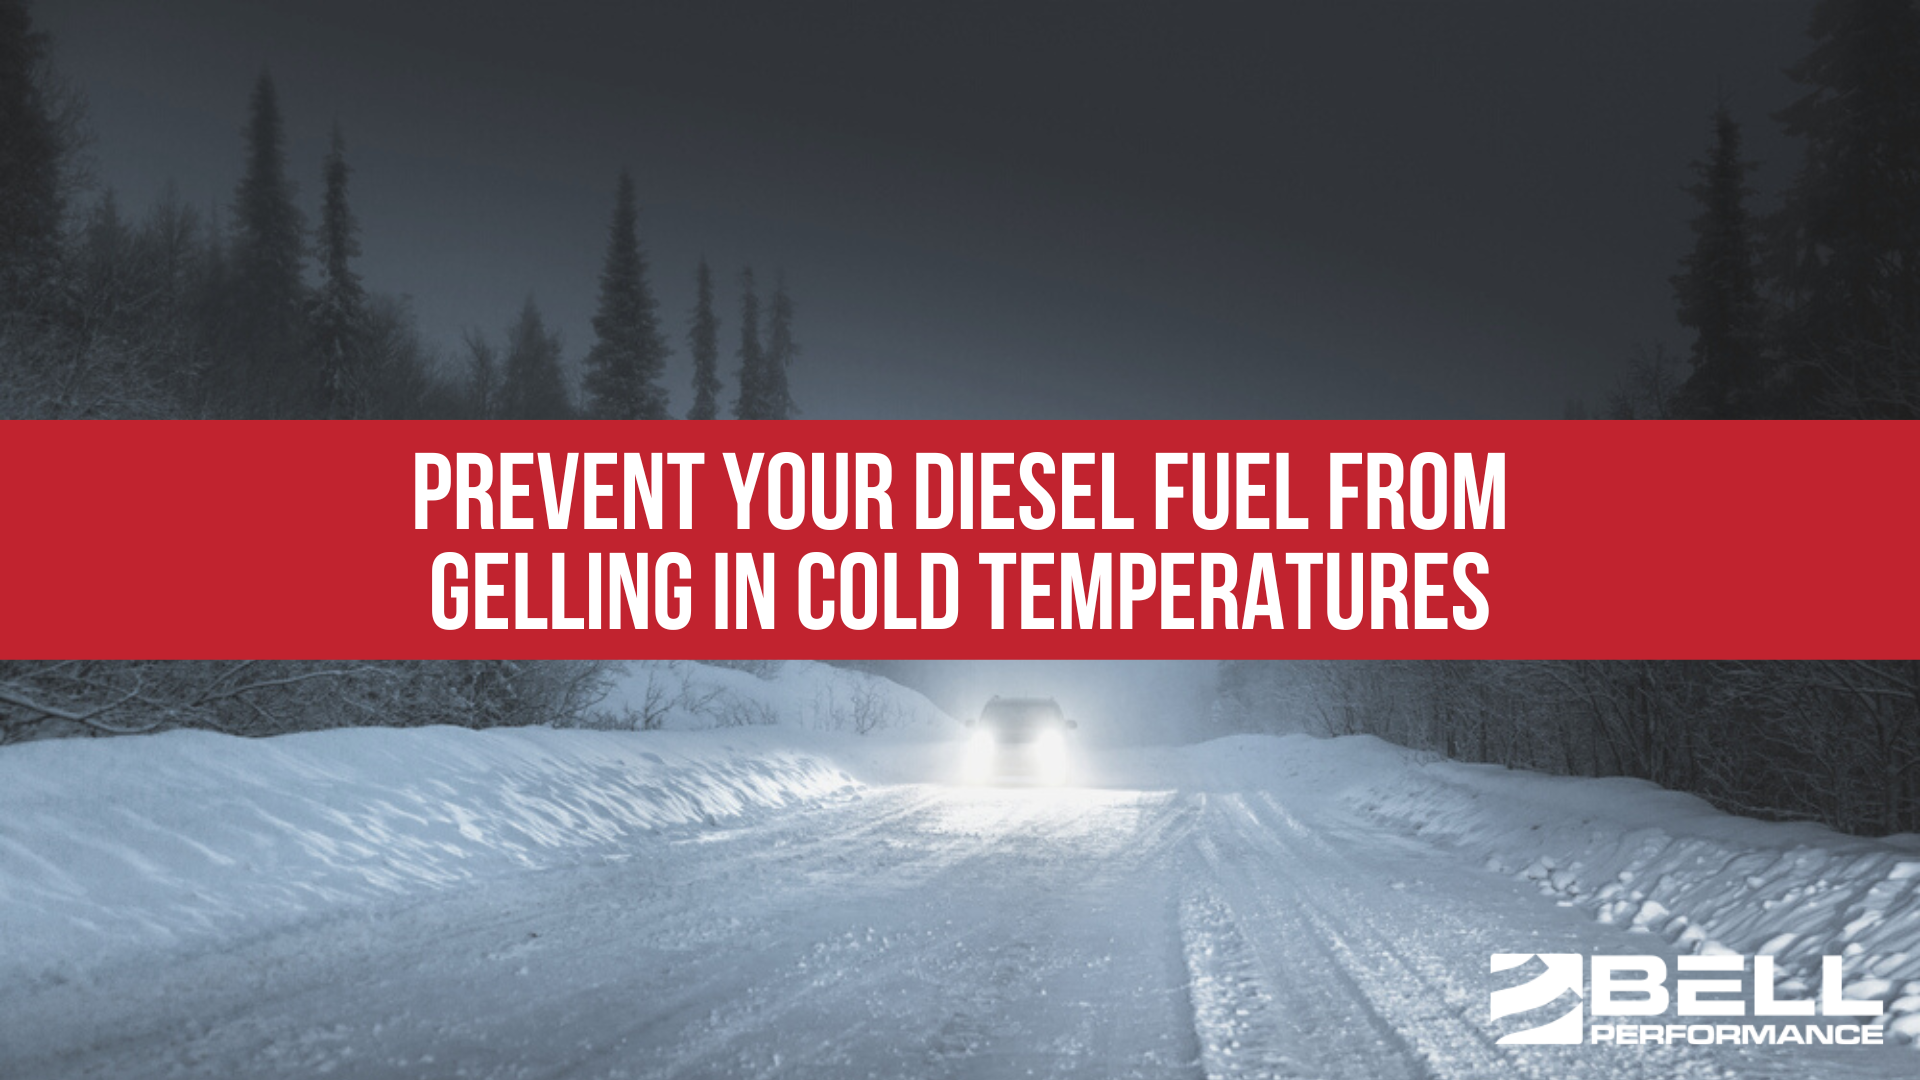 Prevent Your Diesel Fuel from Gelling in Cold Temperatures